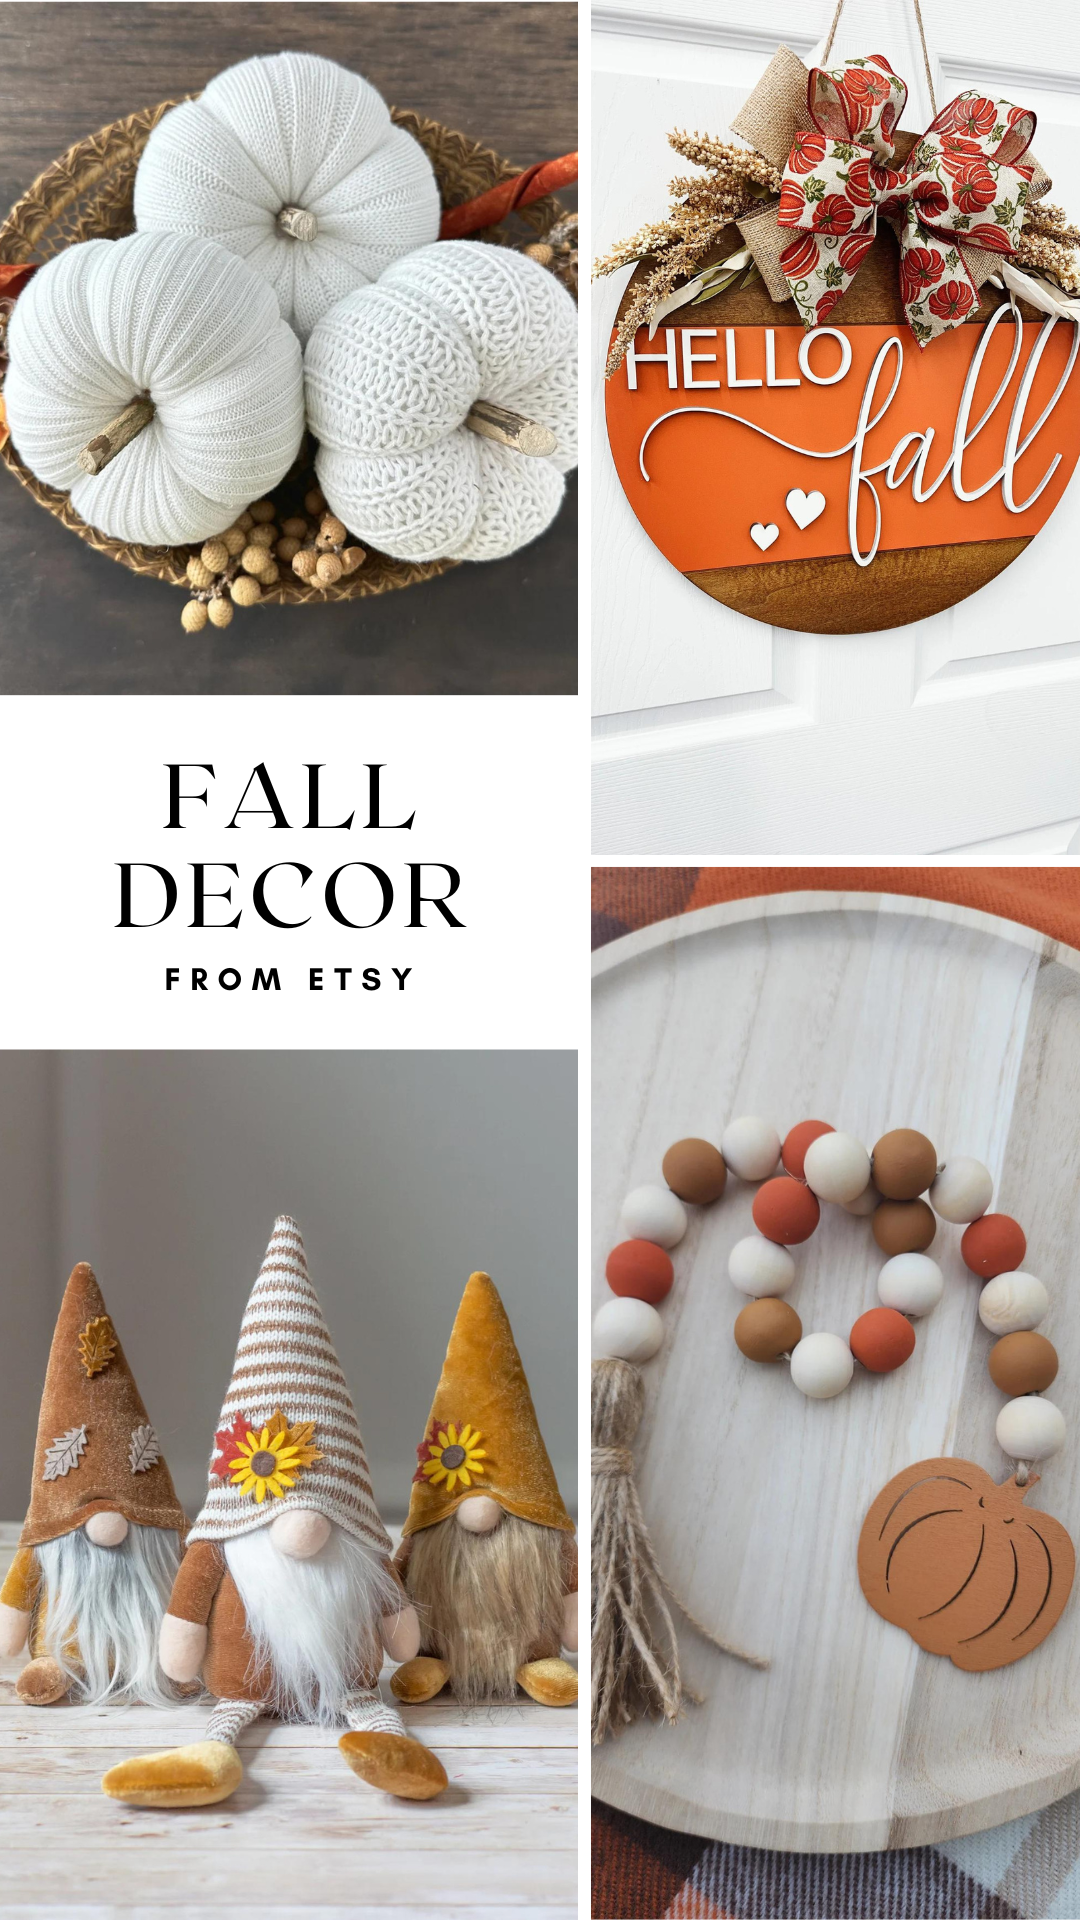 Browse an amazing selection of home decor for the fall season from Etsy! All items are handmade in the US with so much care. Etsy is the perfect way to skip the big box stores and shop small this fall season! 🍂 #fall #homedecor #shopsmall #Etsy #pumpkin